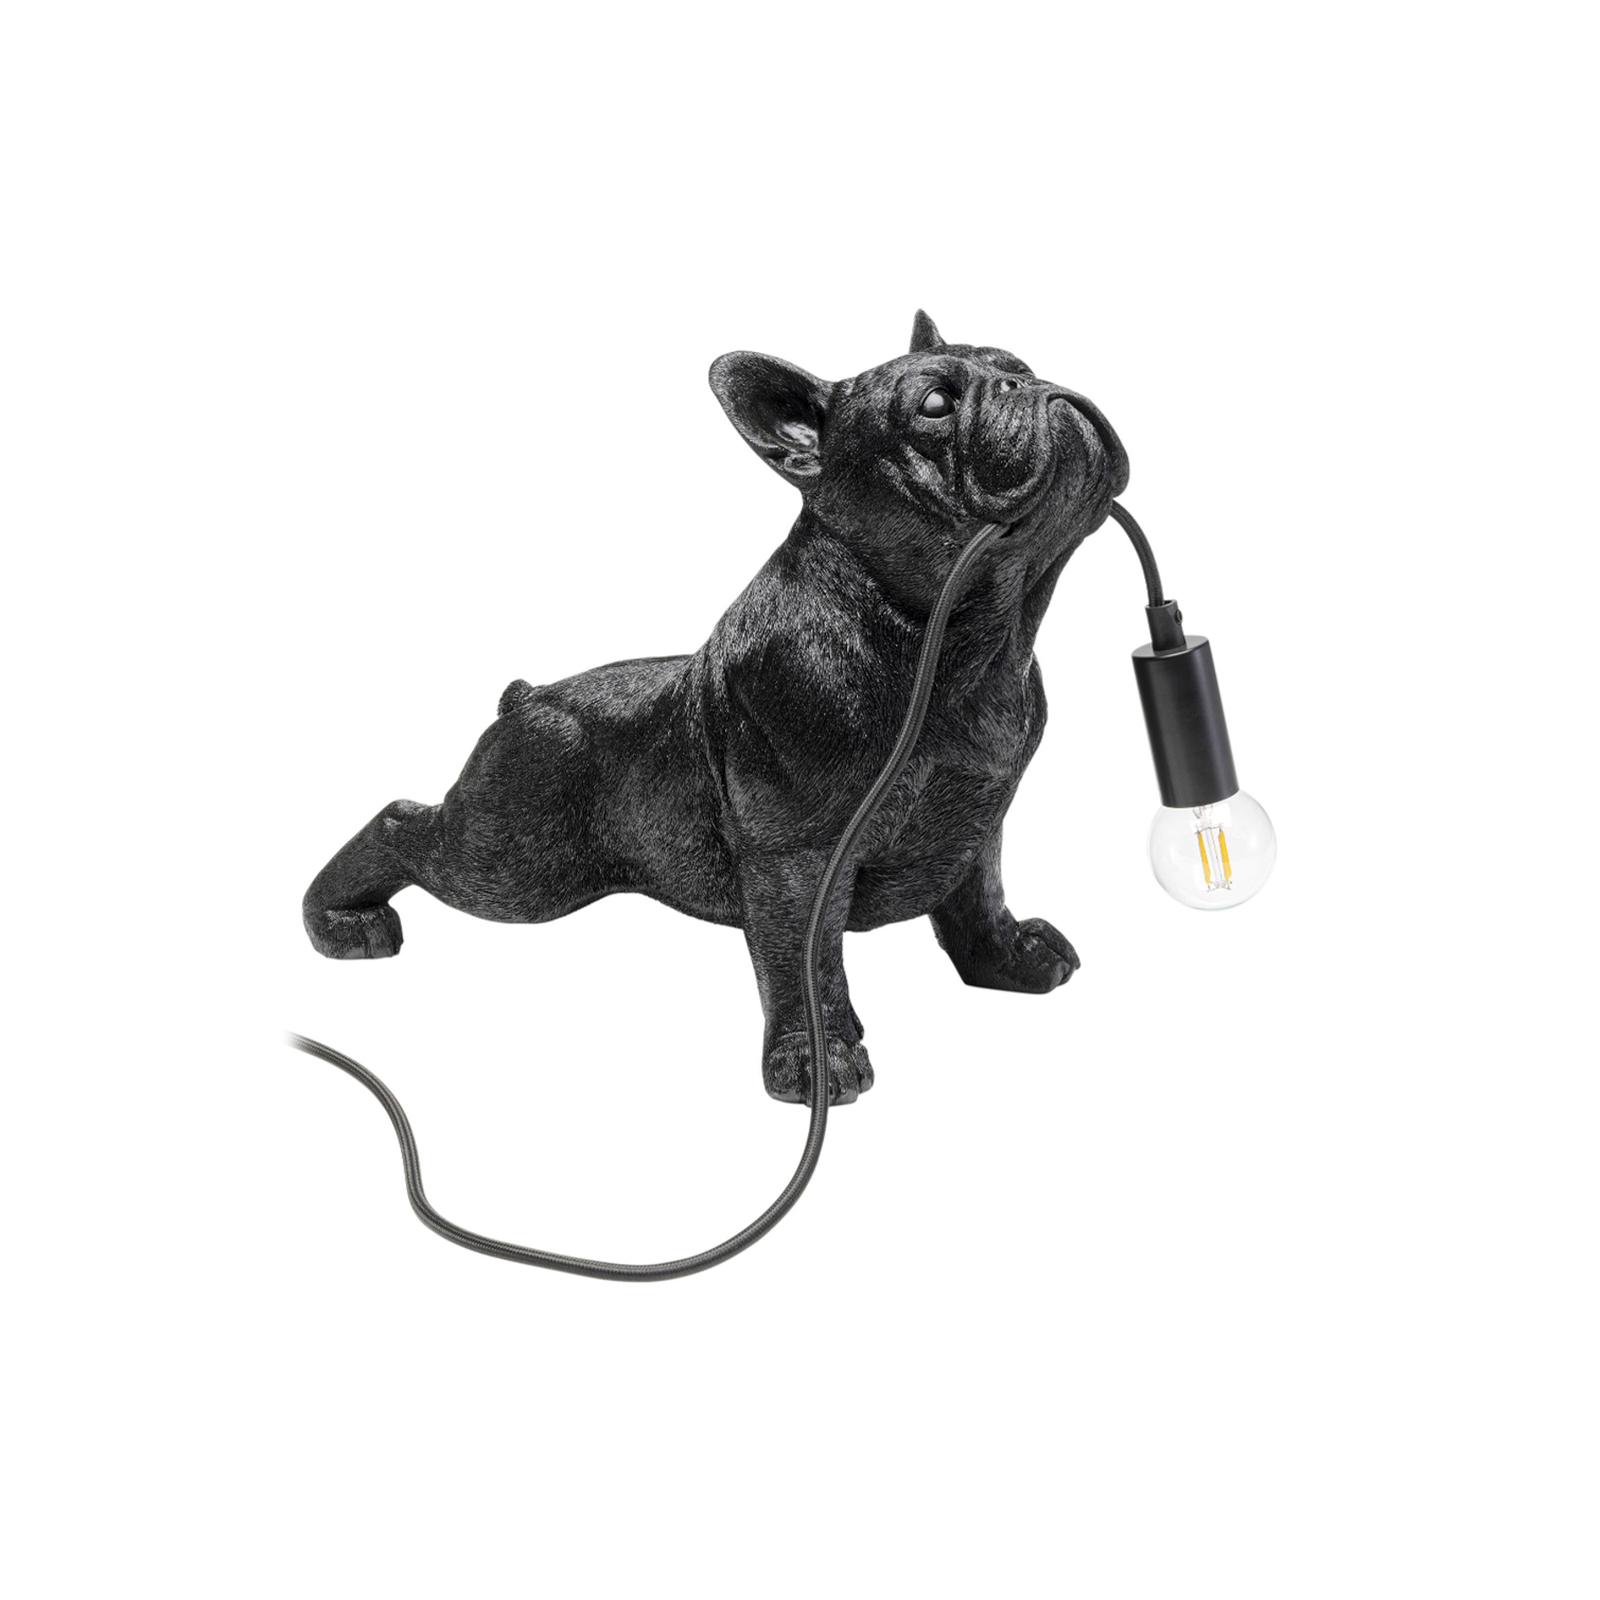 KARE table lamp Toto, black, synthetic resin, dog figure